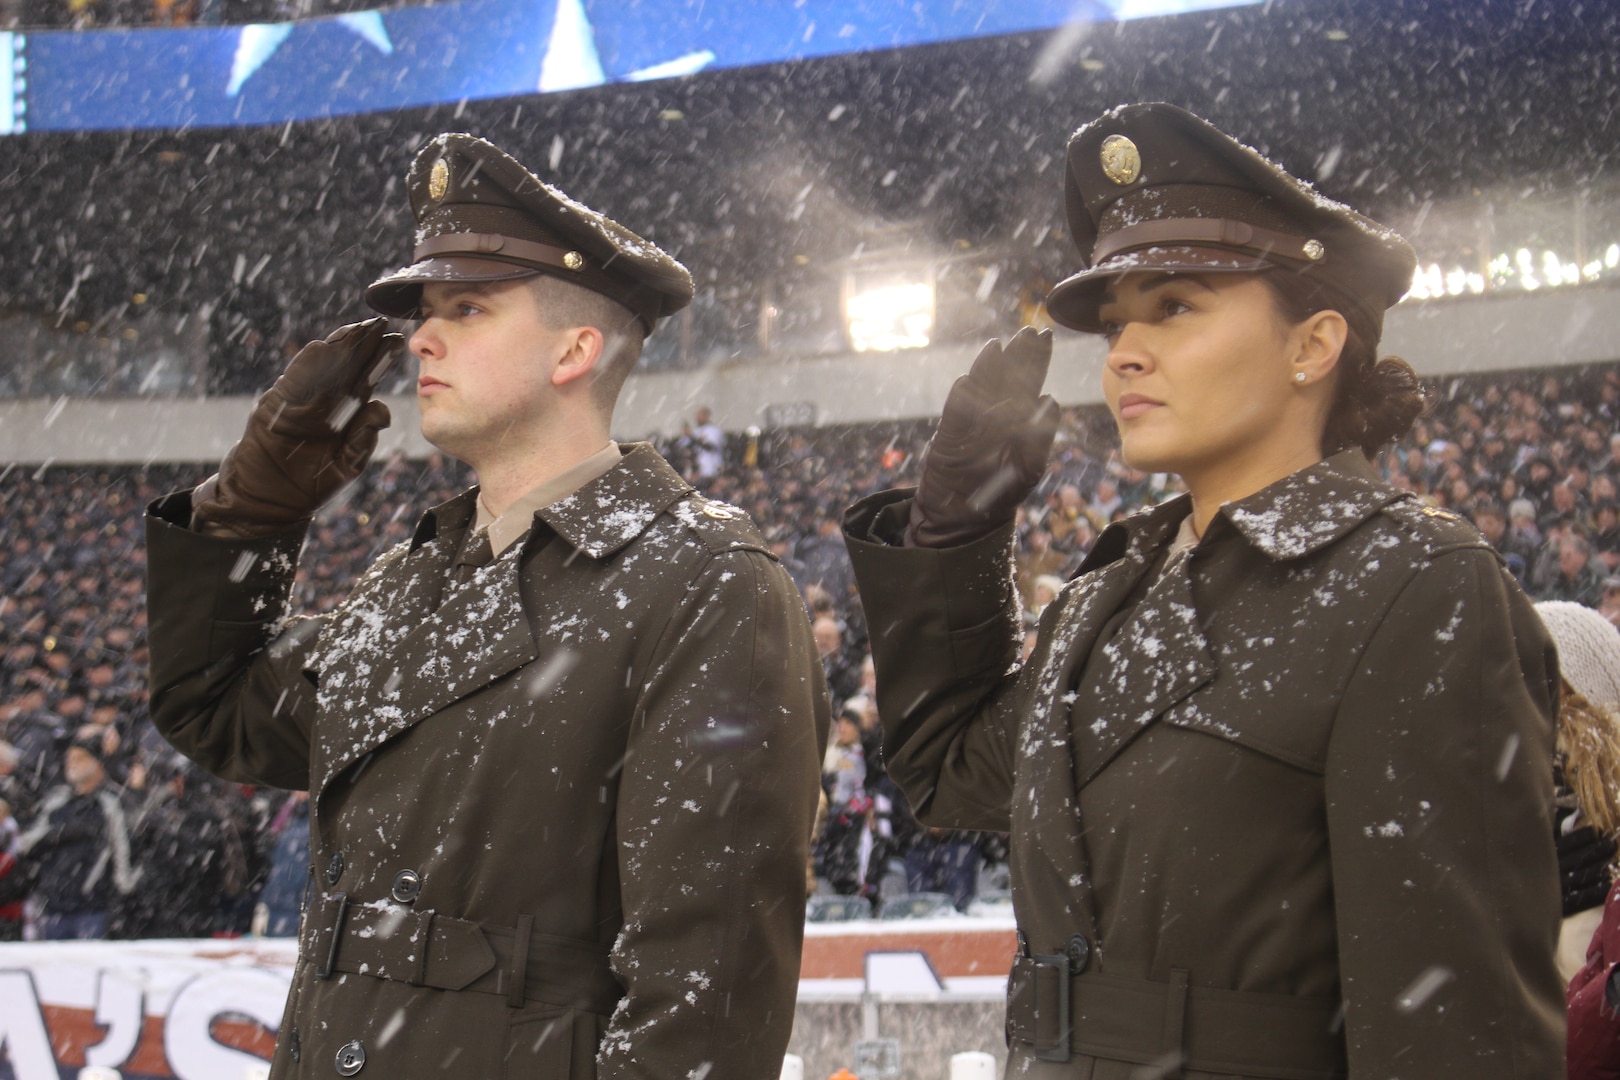 Soldier Models of the proposed Pink and Green daily service uniform display the outfits overcoat, as they render the hand salute during the National Anthem at Lincoln Financial Field in Philadelphia, Pennsylvania, during the Army-Navy Game December 9, 2017.